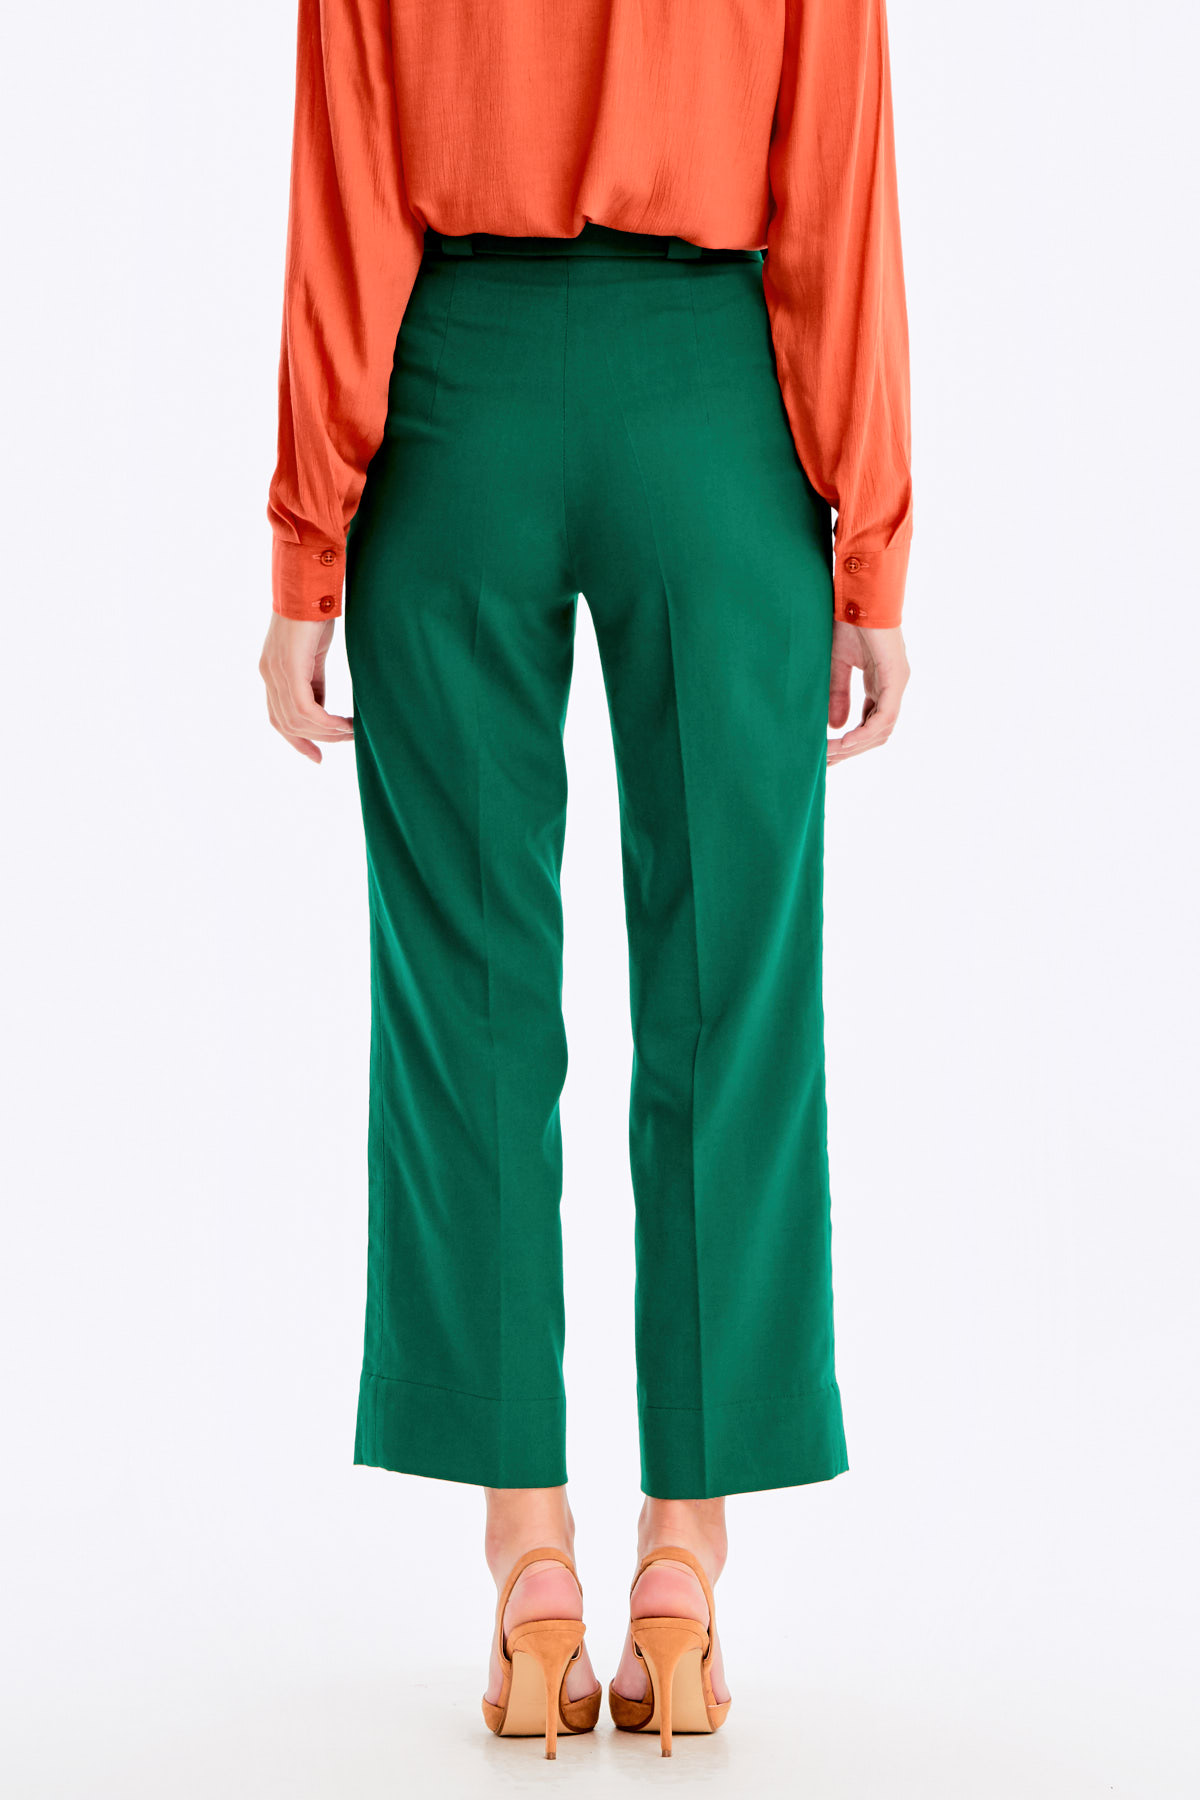 Green pants with trouserstripe, photo 4